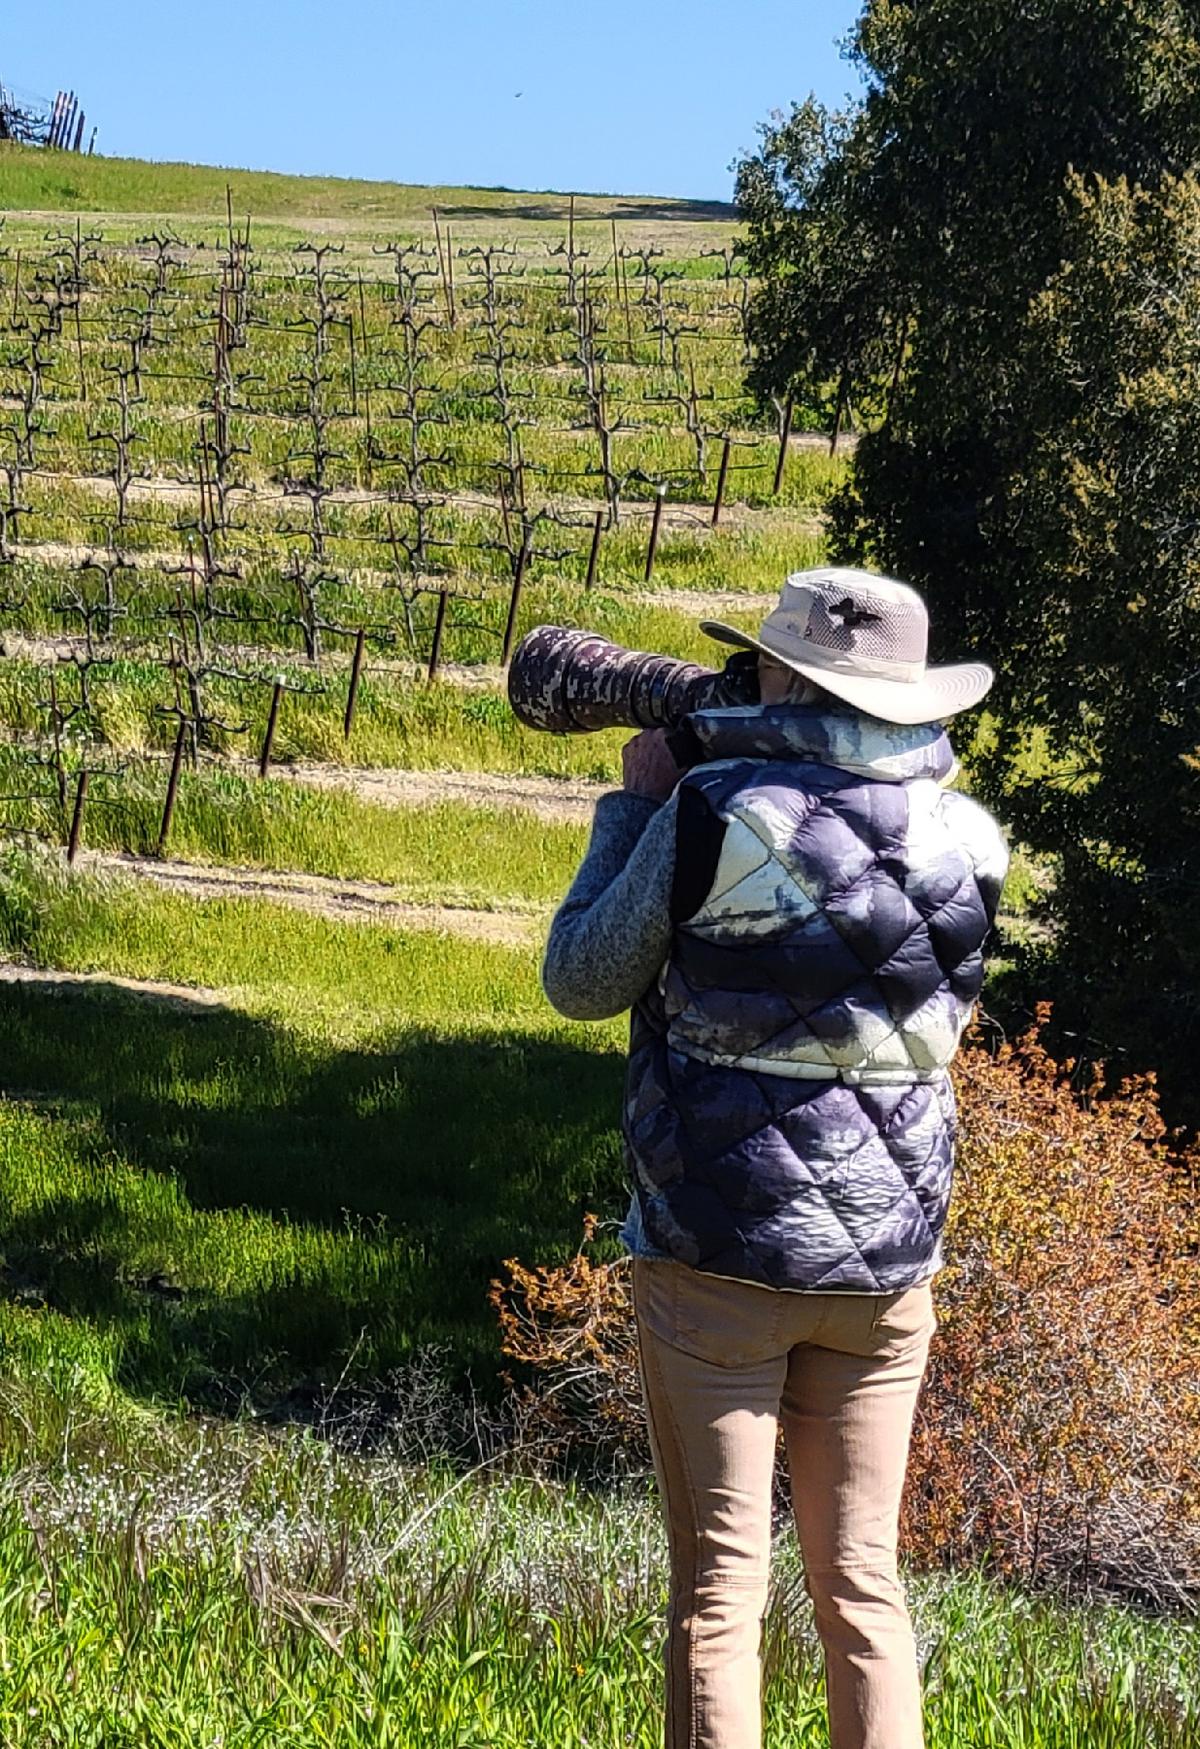 A bird-watcher and photographer enjoys a day at Calcareous Vineyards in Paso Robles, California. (Photo courtesy of Jim Farber)